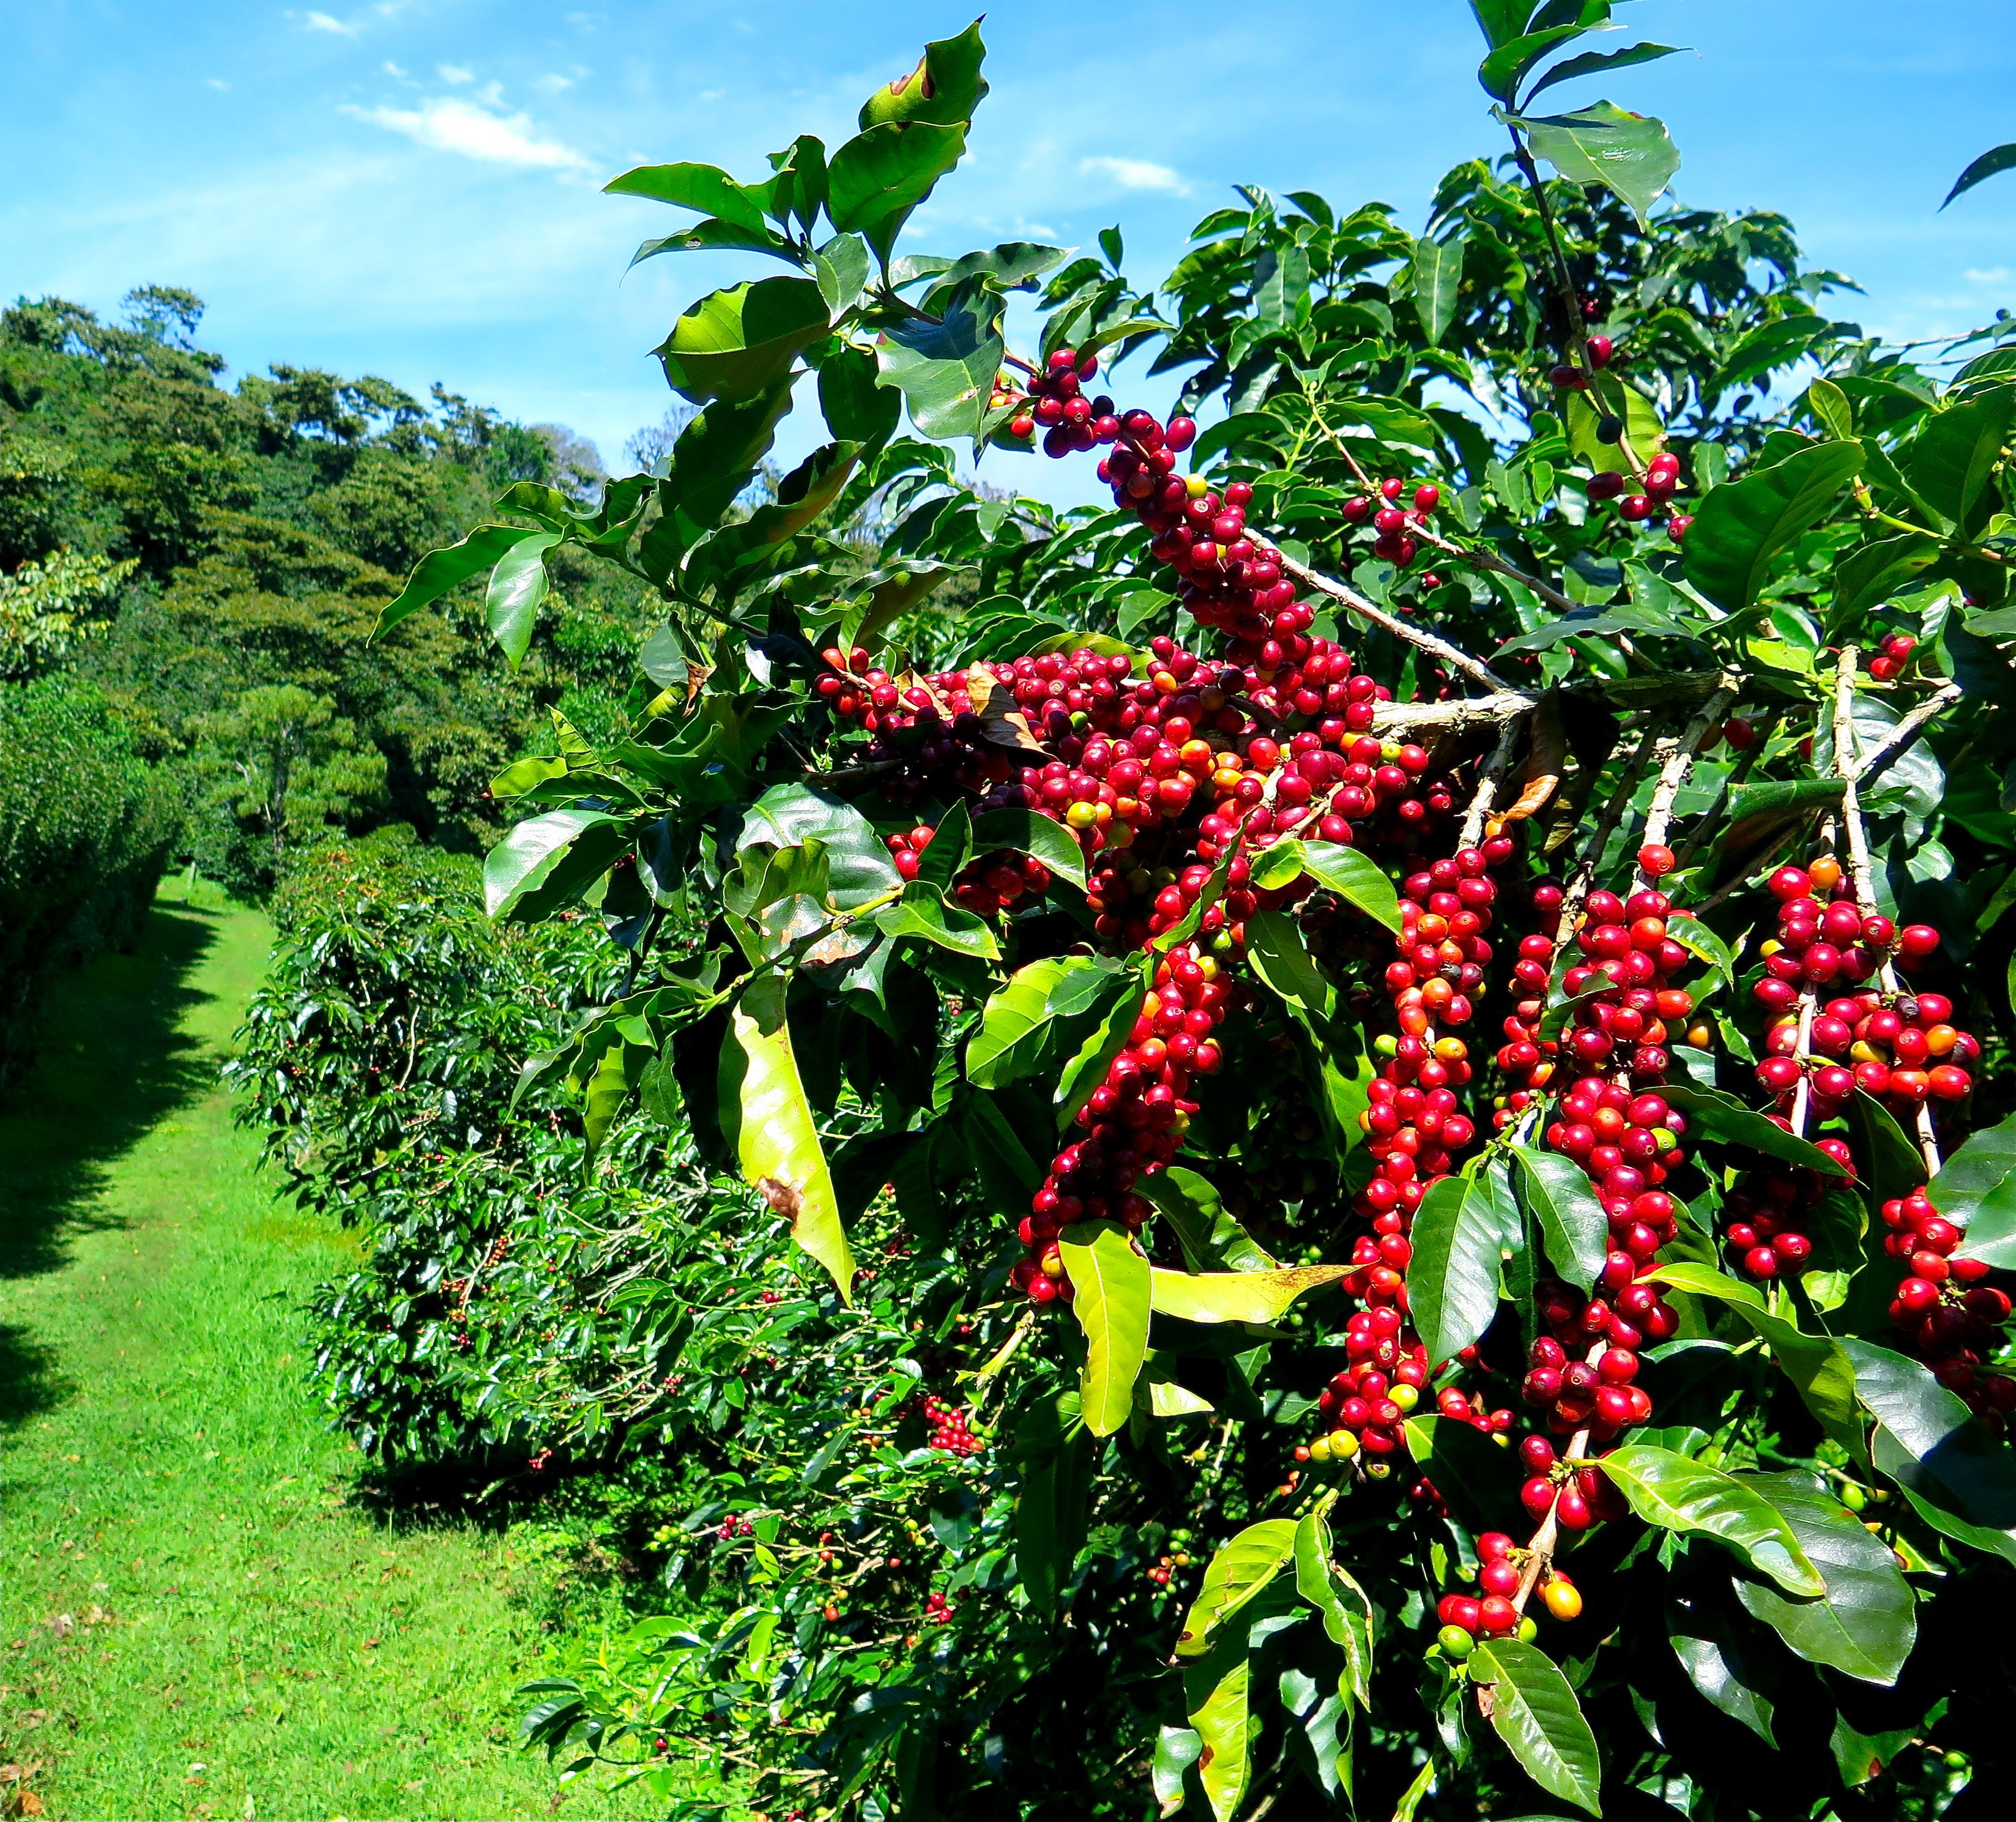 Finca Lerida's ripening coffee. The farm produces 30,000 pounds of raw coffee beans per year. Photo/Keith Schneider